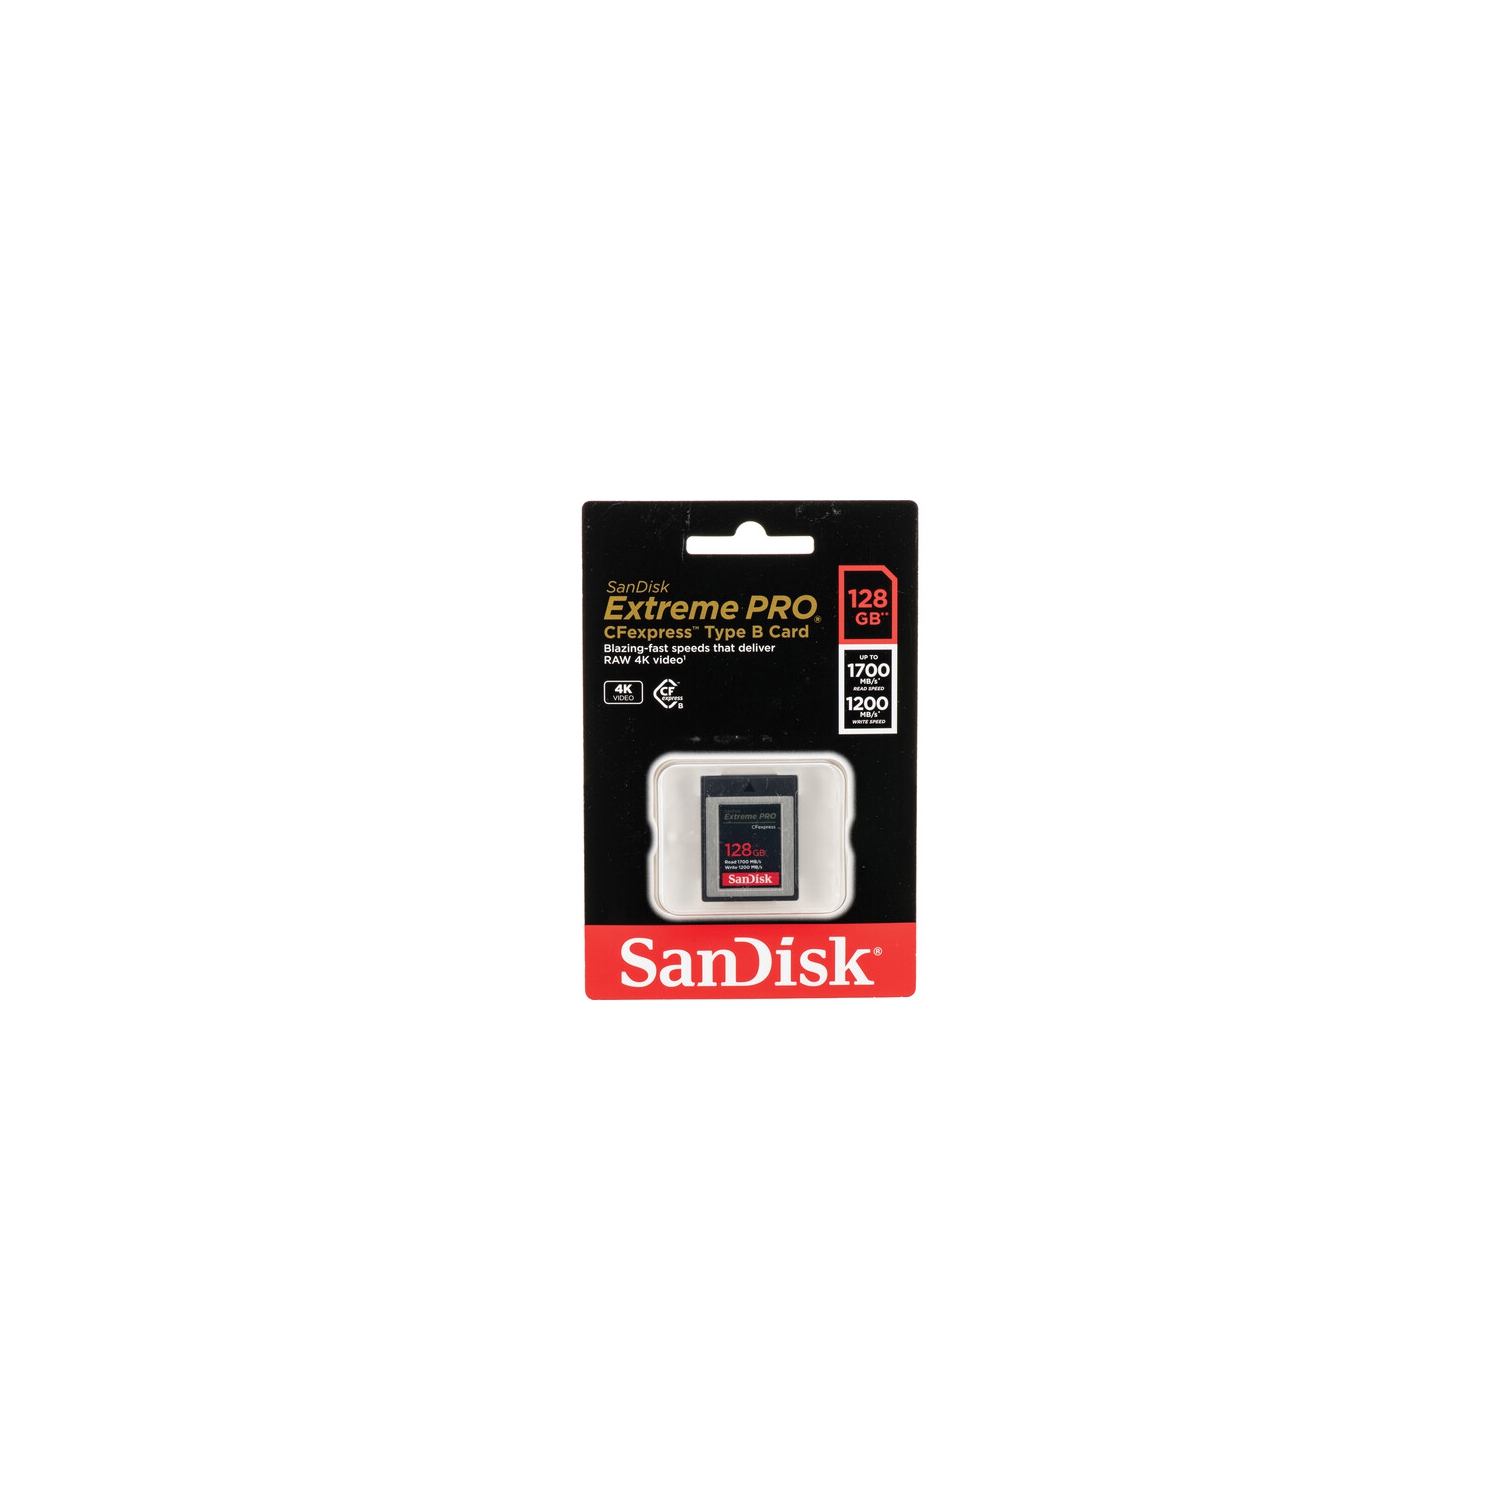 SanDisk Extreme PRO CFexpress Card Type B (128GB, SDCFE-128G-GN4NN) - Brand New